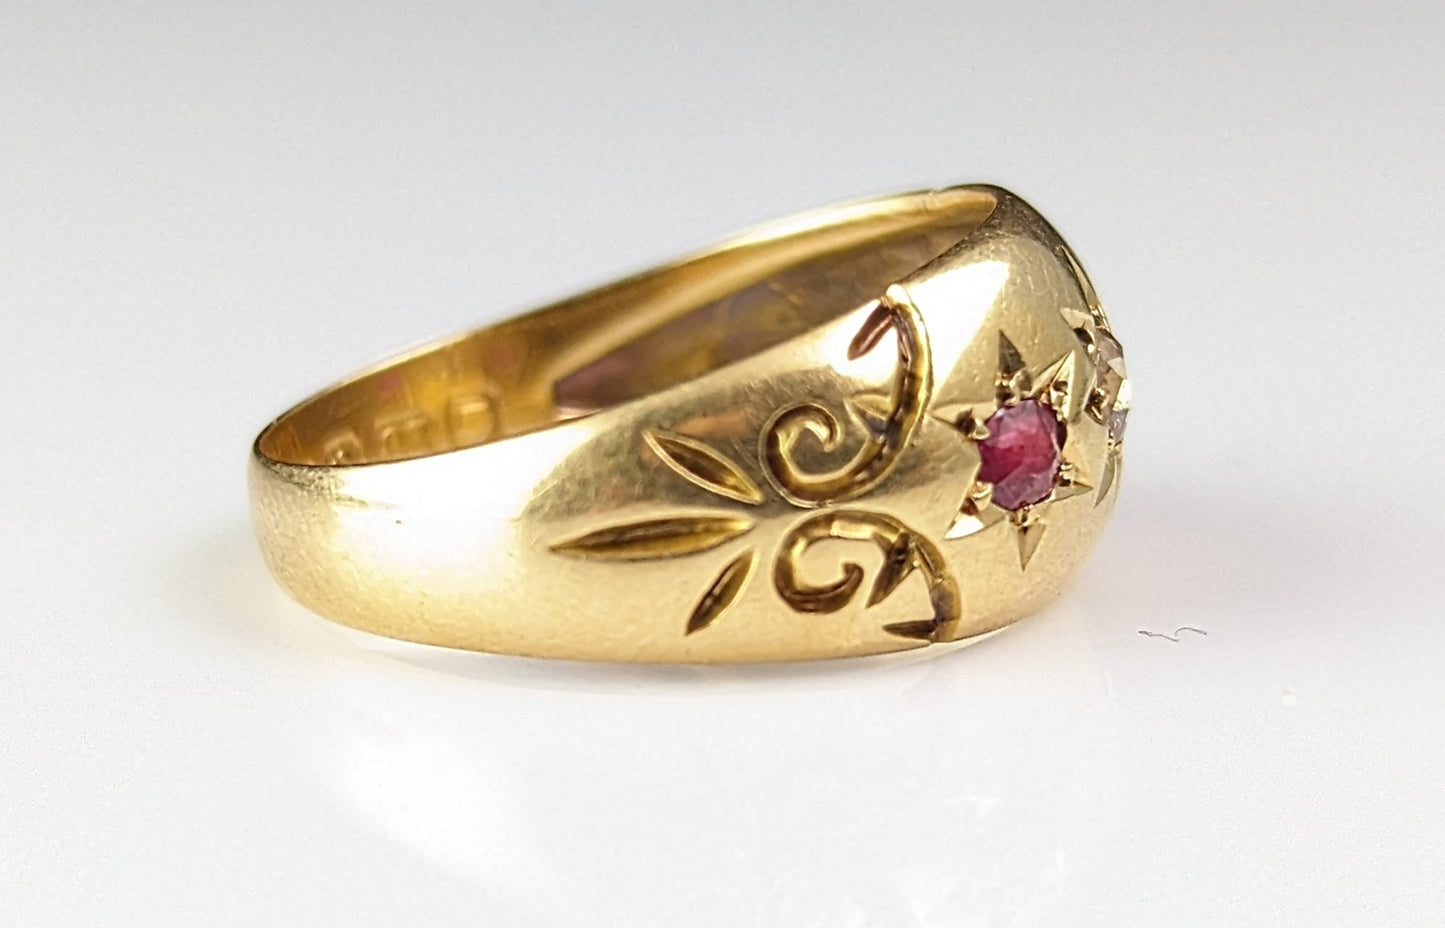 Antique Star set Ruby and Diamond ring, 18ct gold, Gypsy set